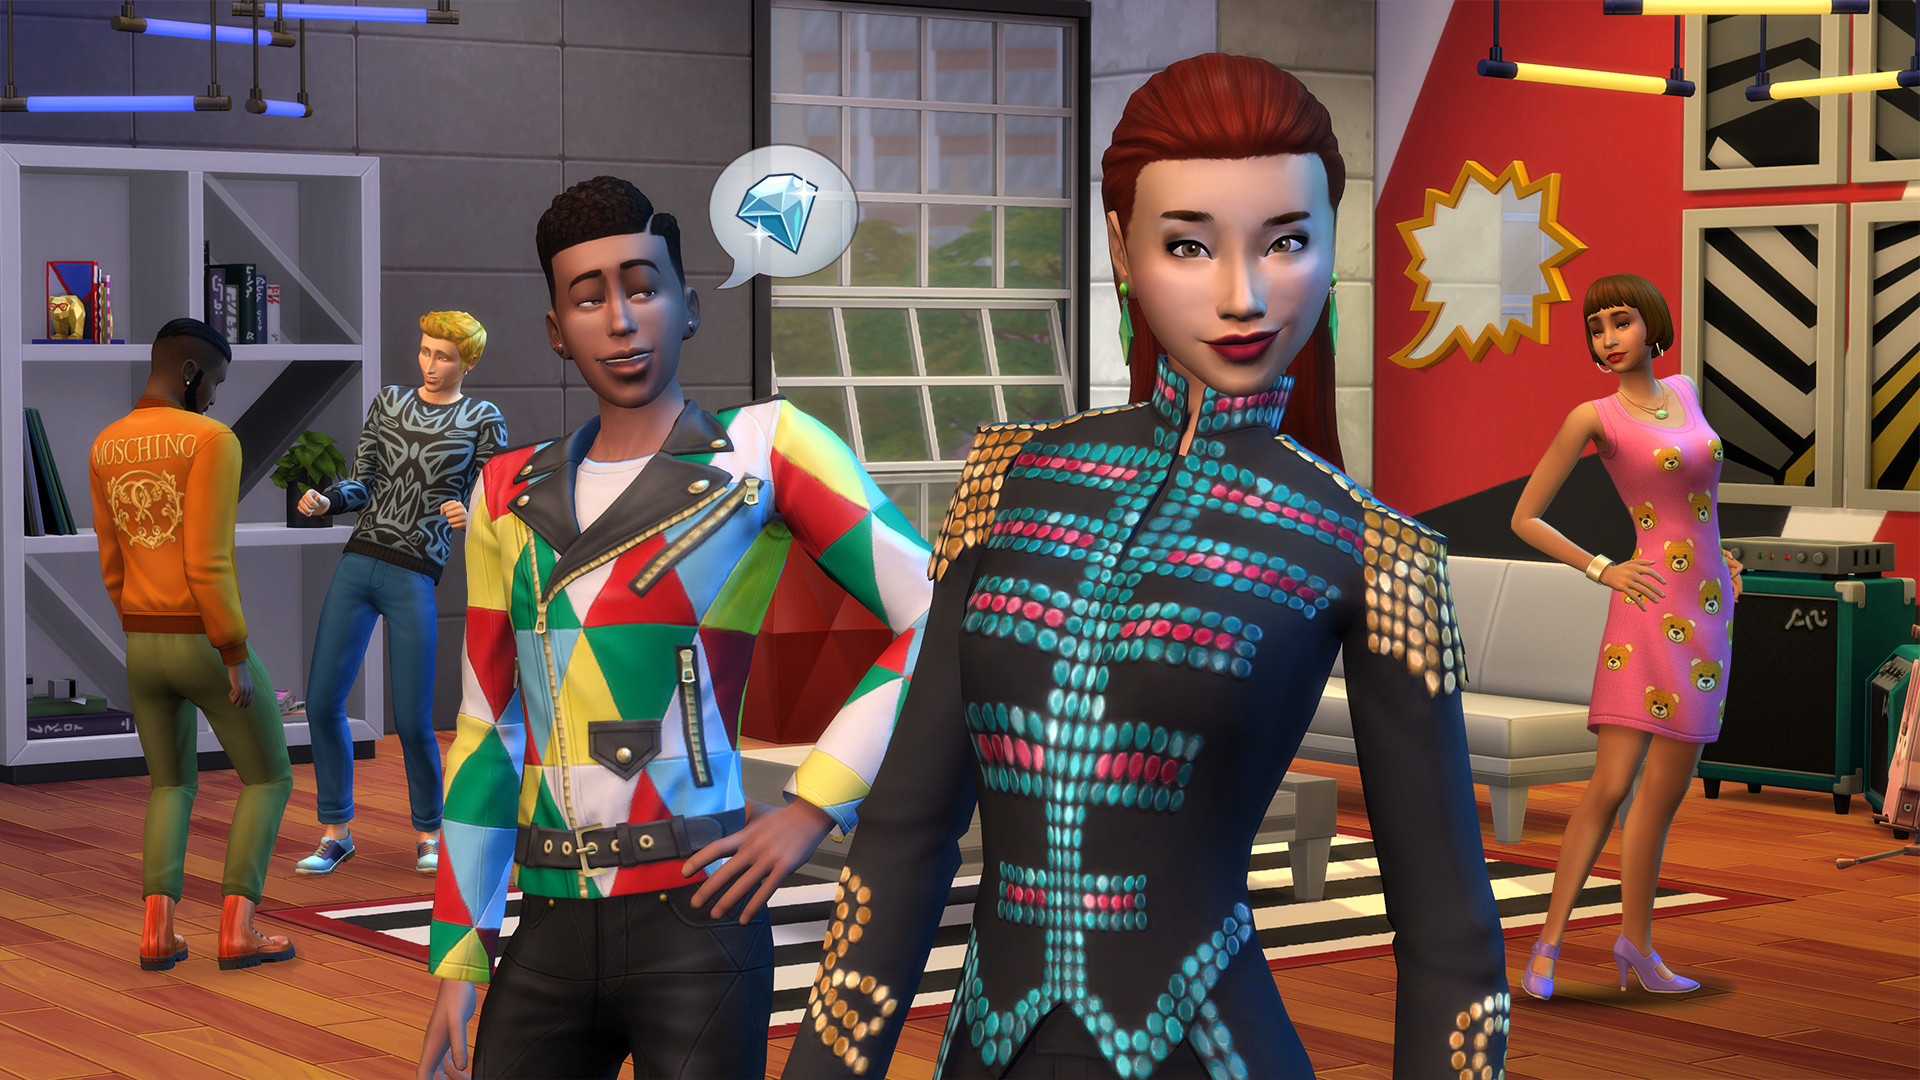 SIMS 4: MOSCHINO STYLING VIDEO + CC LINKS! 